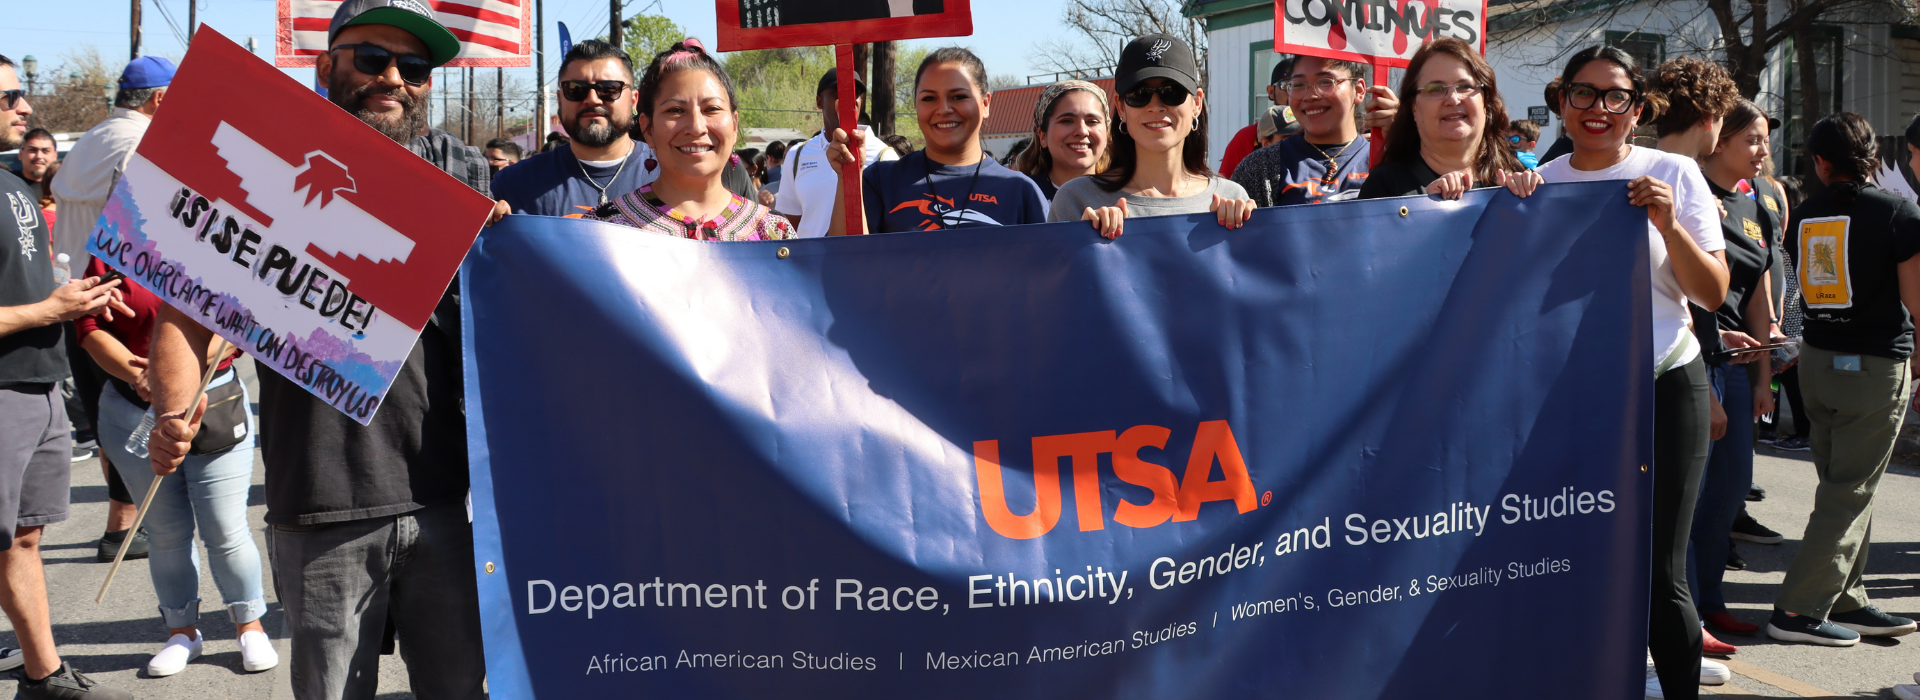 Department of Race, Ethnicity, Gender, and Sexuality Studies folks attending the Cesar Chavez March